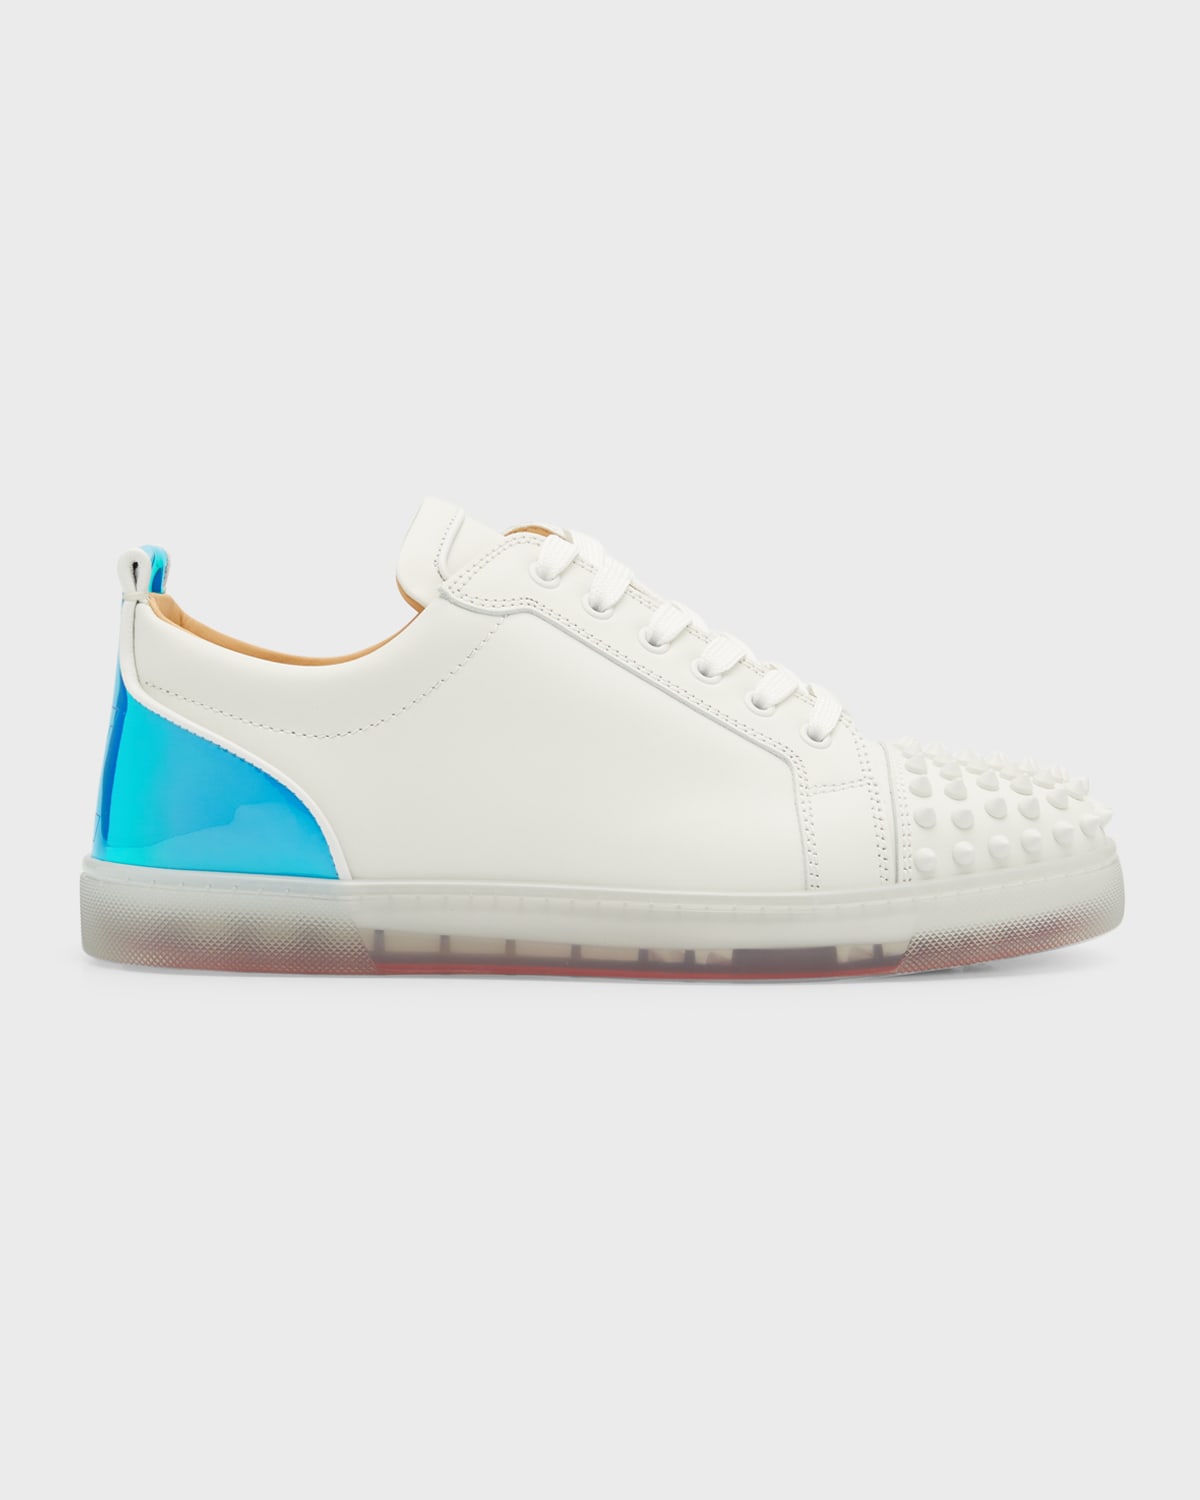 Christian Louboutin Blue/White Fabric/Leather Spikes High-Top Sneakers Size  9.5/40 - Yoogi's Closet